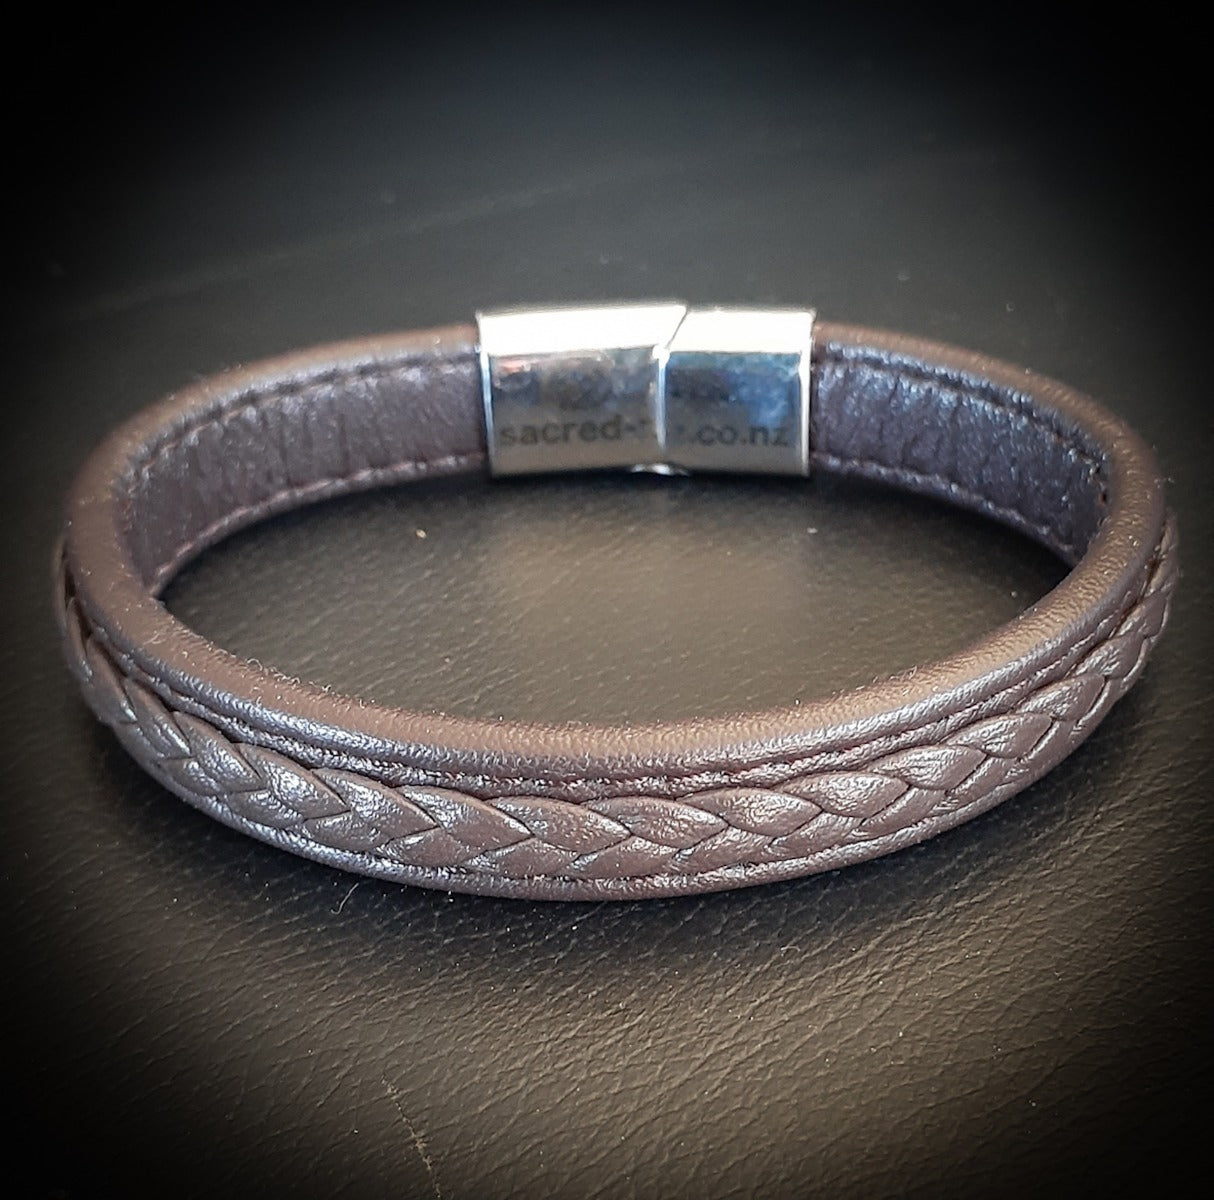 2100 NZ Magnetic Leather Band "Stingray Clasp"